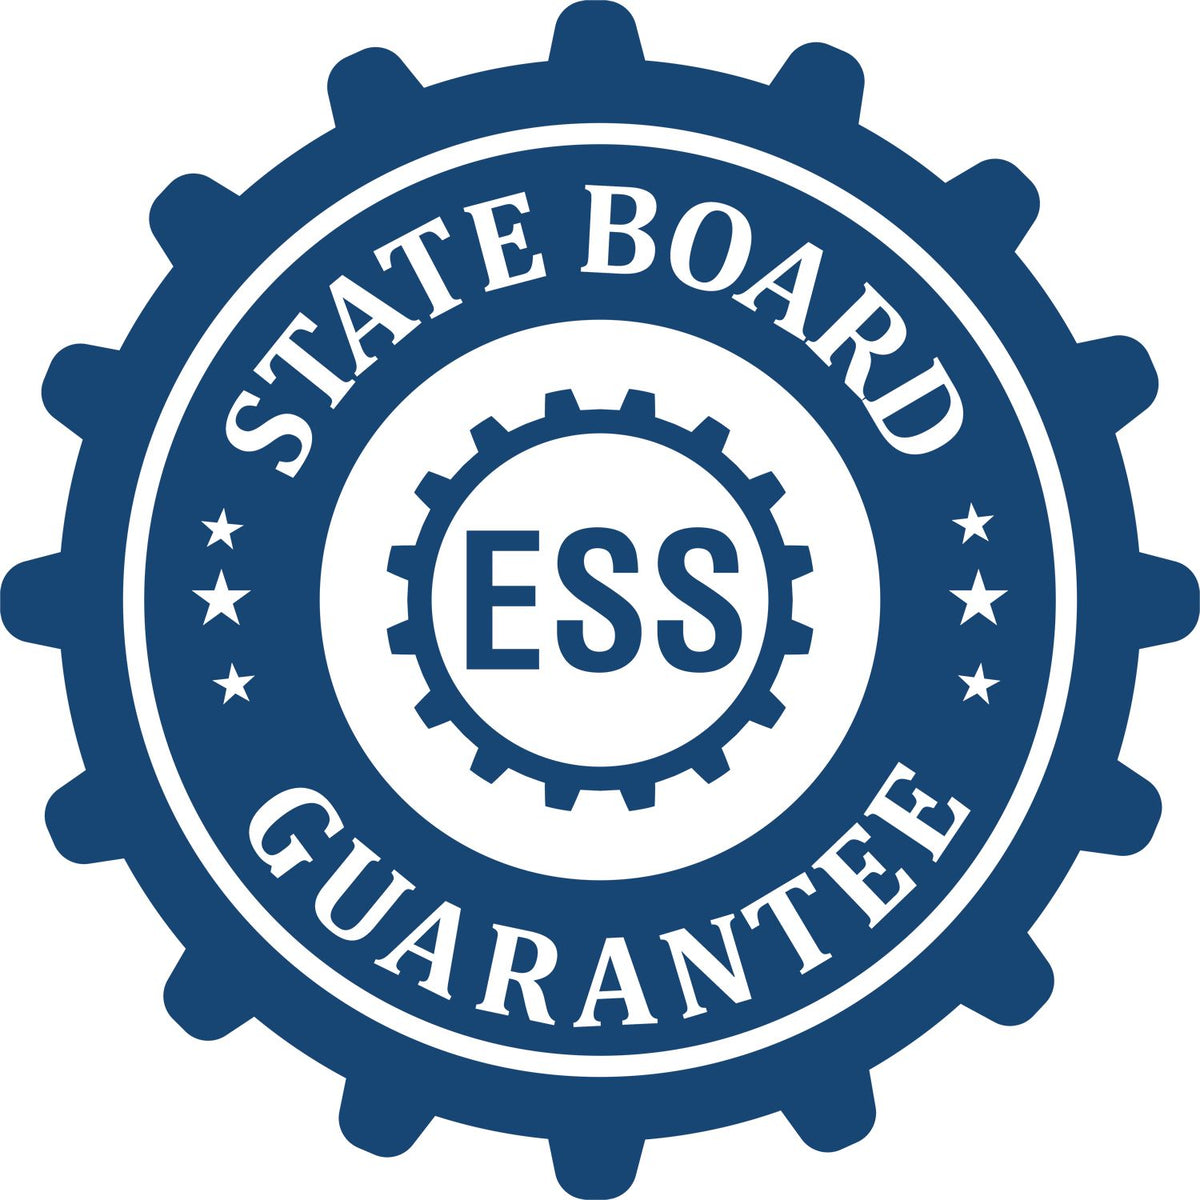 An emblem in a gear shape illustrating a state board guarantee for the Heavy-Duty Kentucky Rectangular Notary Stamp product.